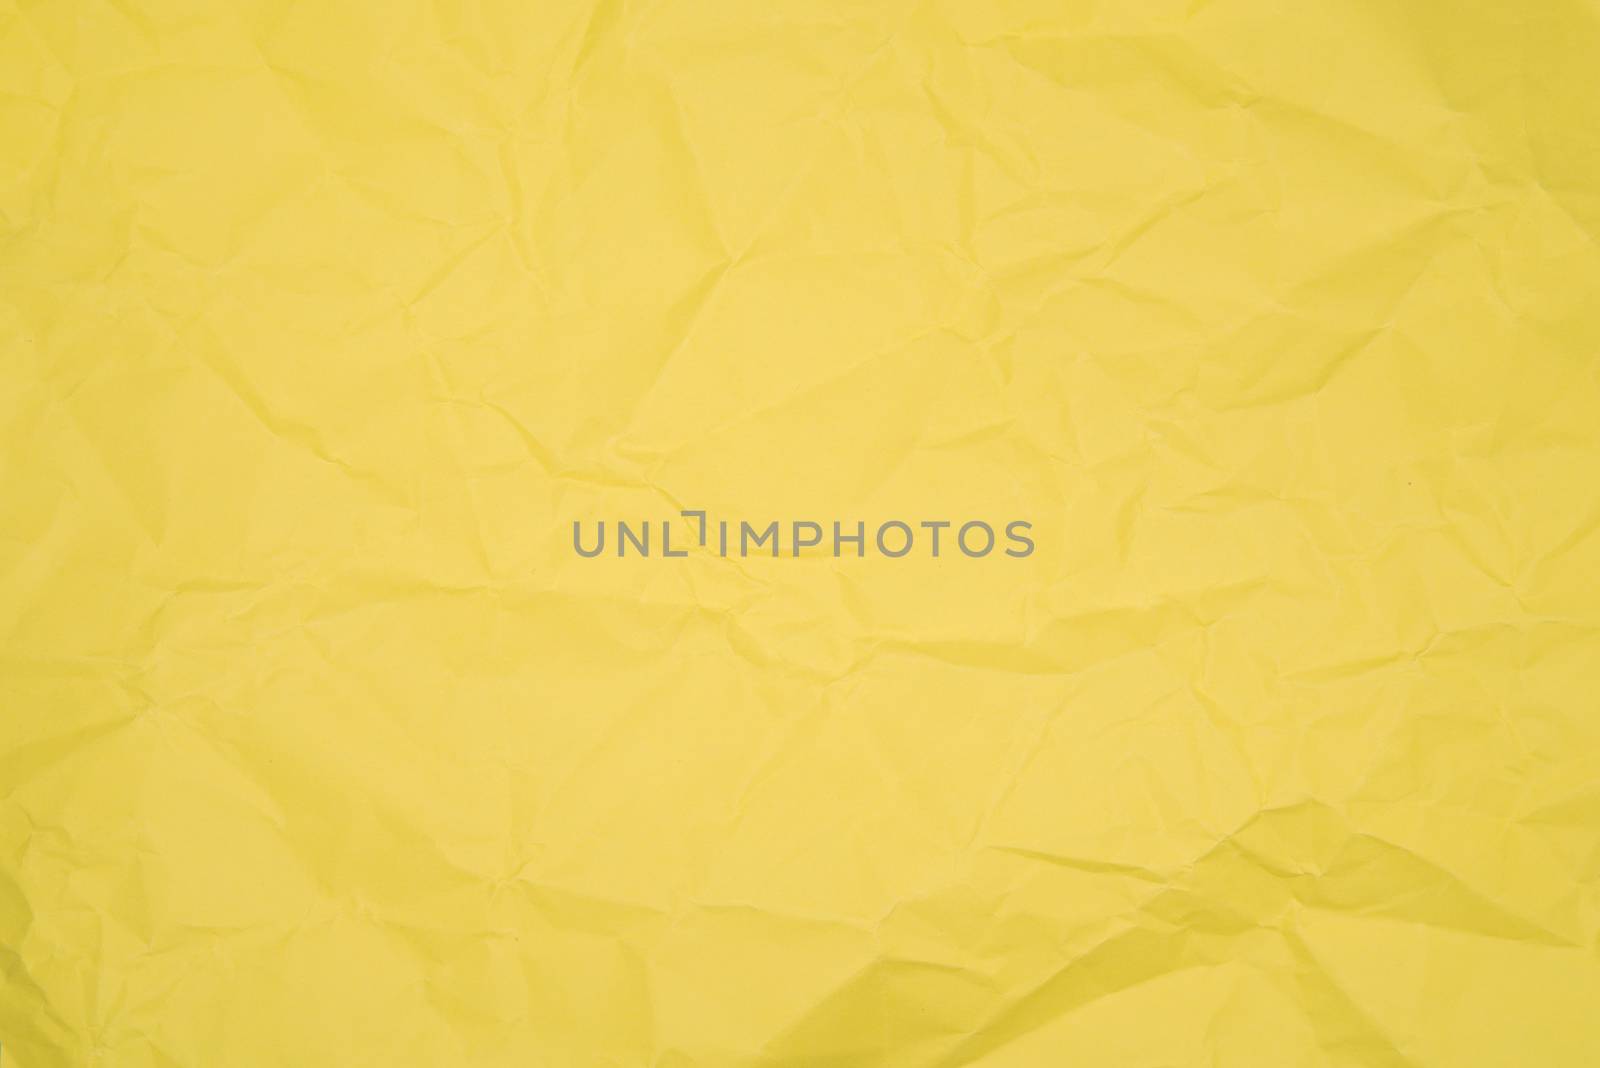 Texture of yellow crumpled paper, close image